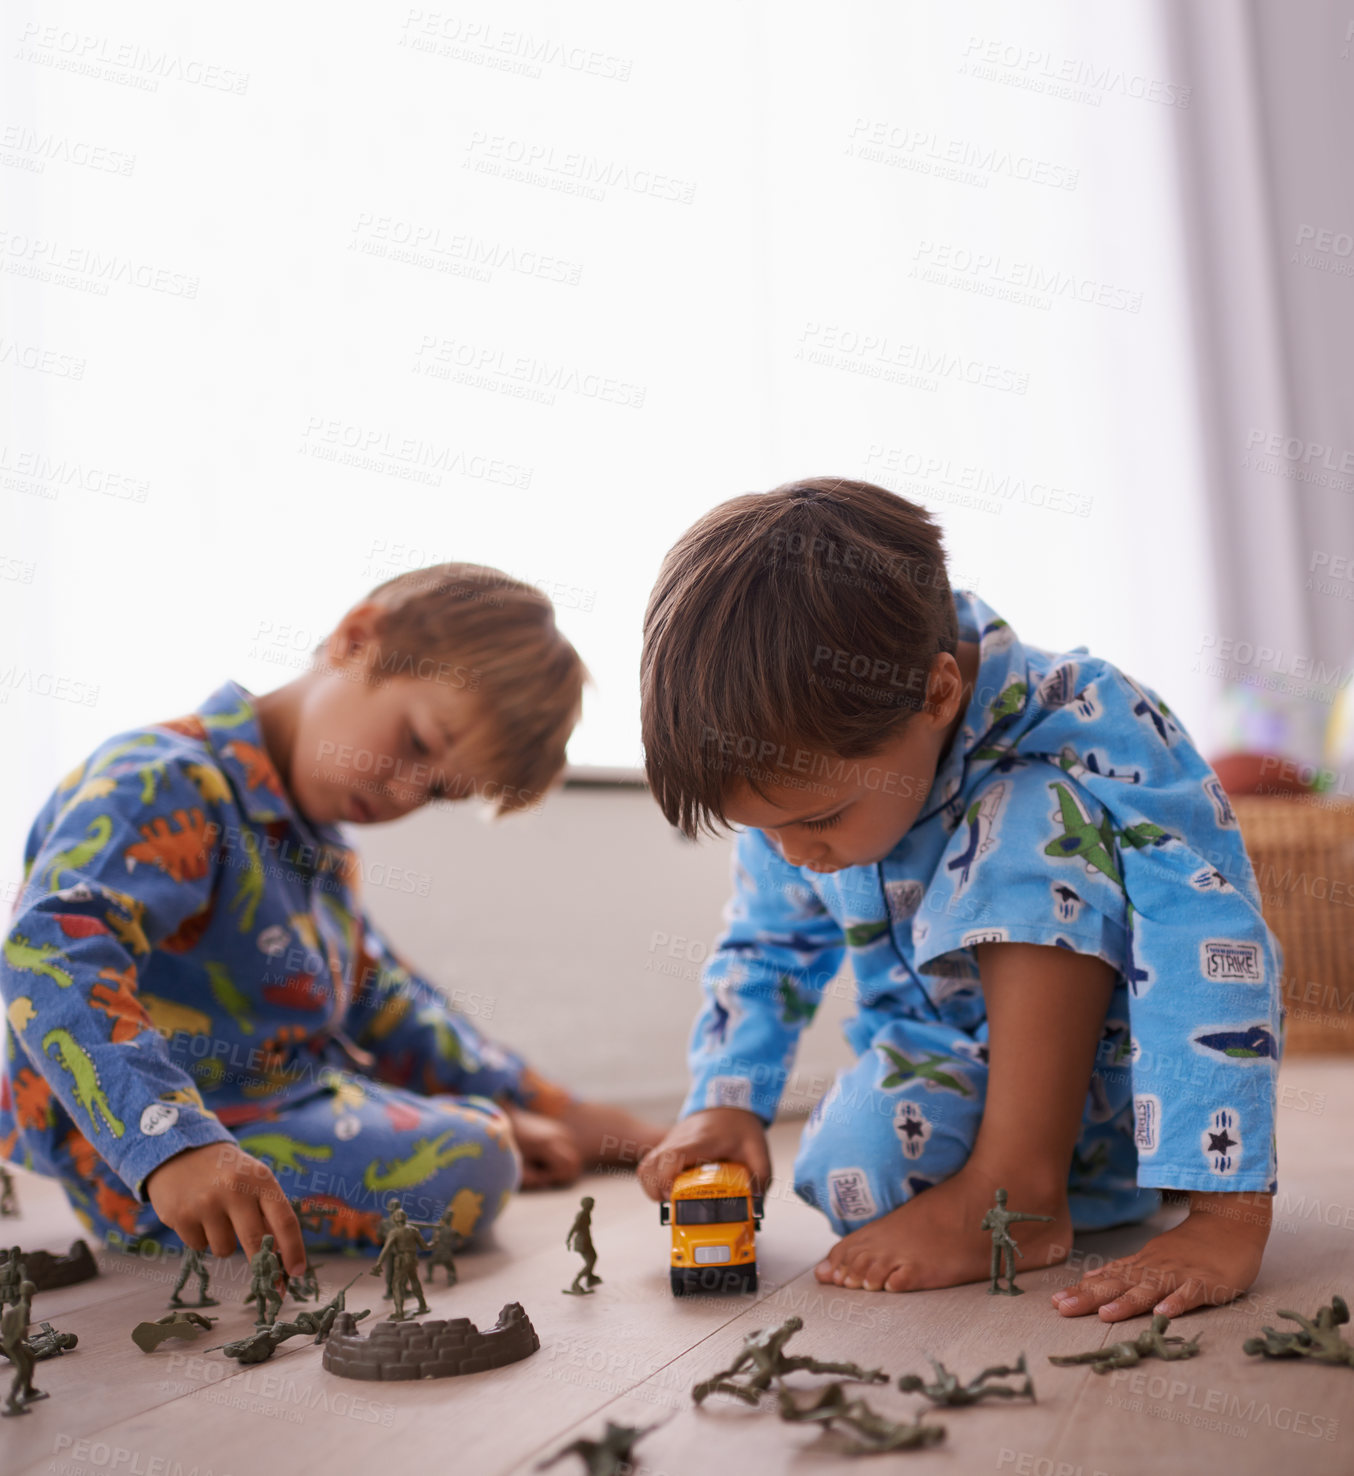 Buy stock photo Young boys, playing and toys together in pajamas for fun with miniature action figures, toy car or games. Brothers, sibling children and family bonding in playroom at home for learning or development